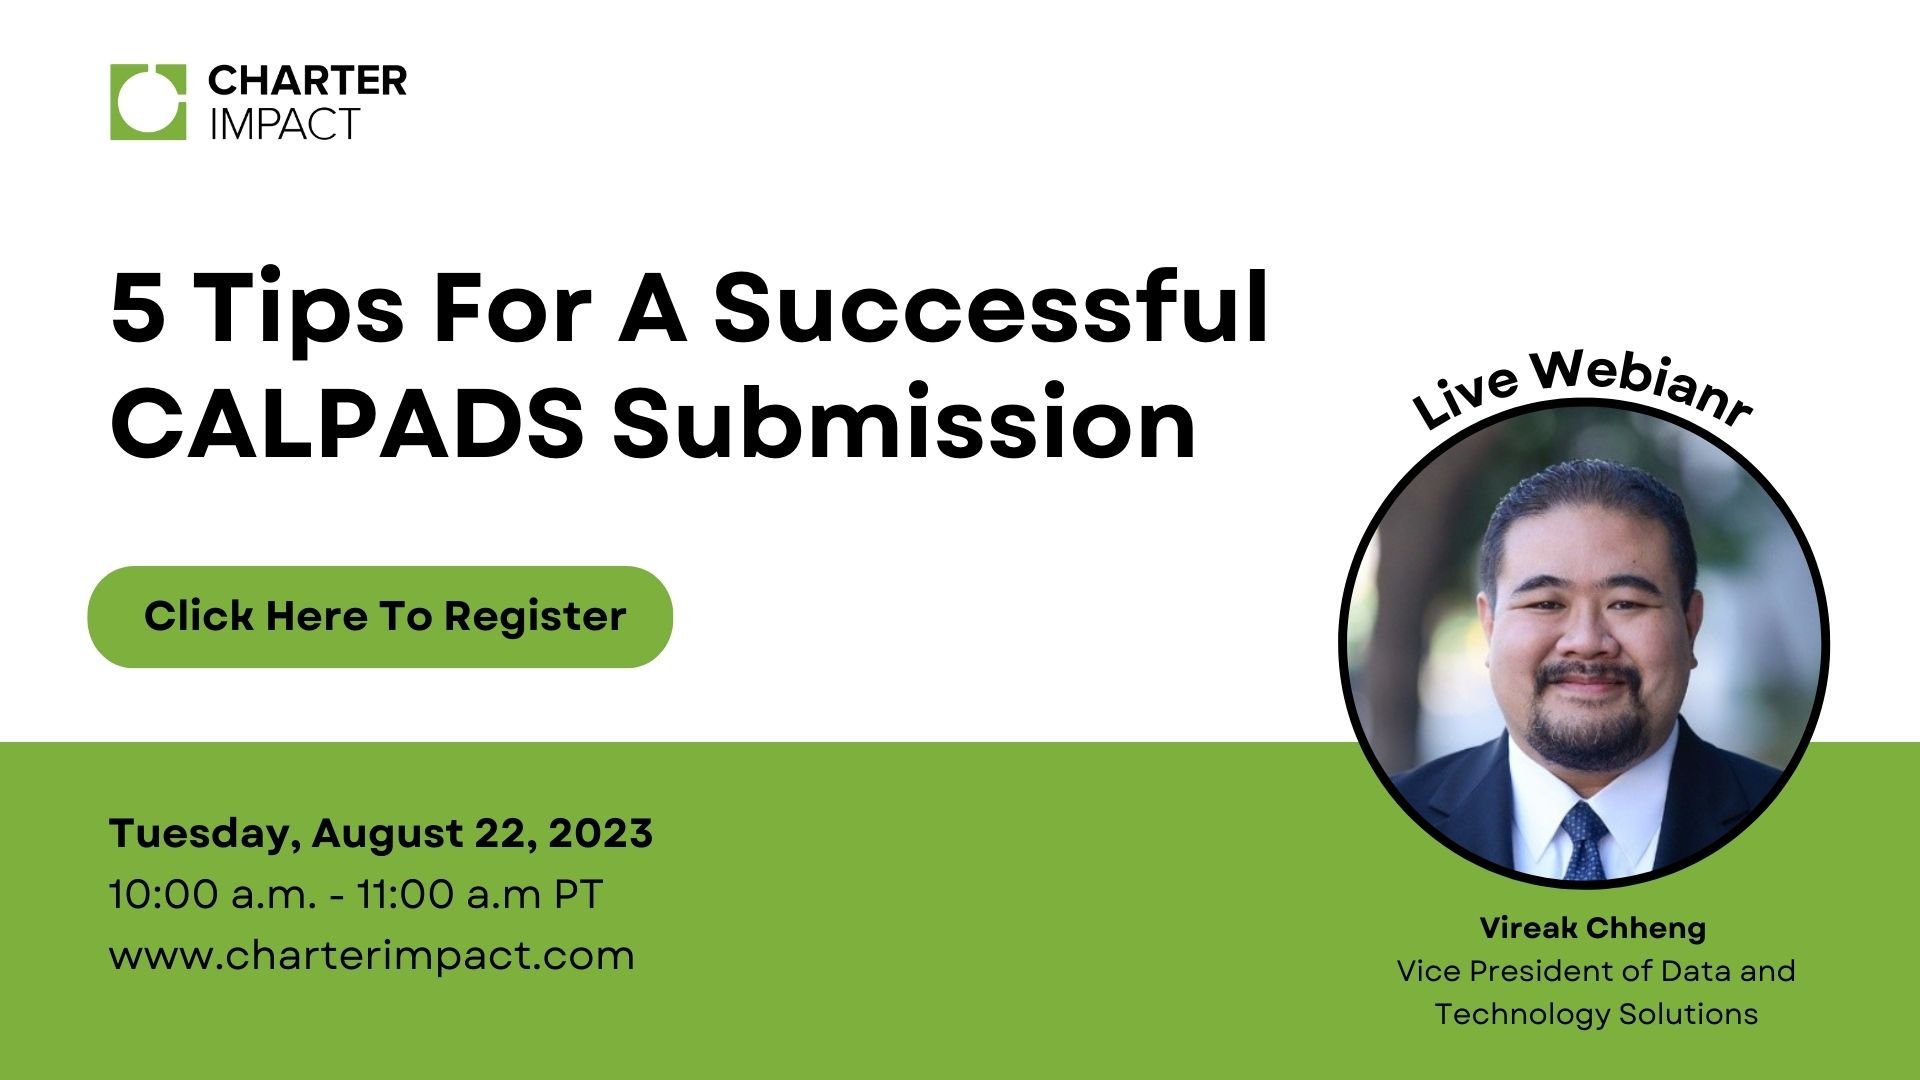 5 Tips for a Successful CALPADS Submission